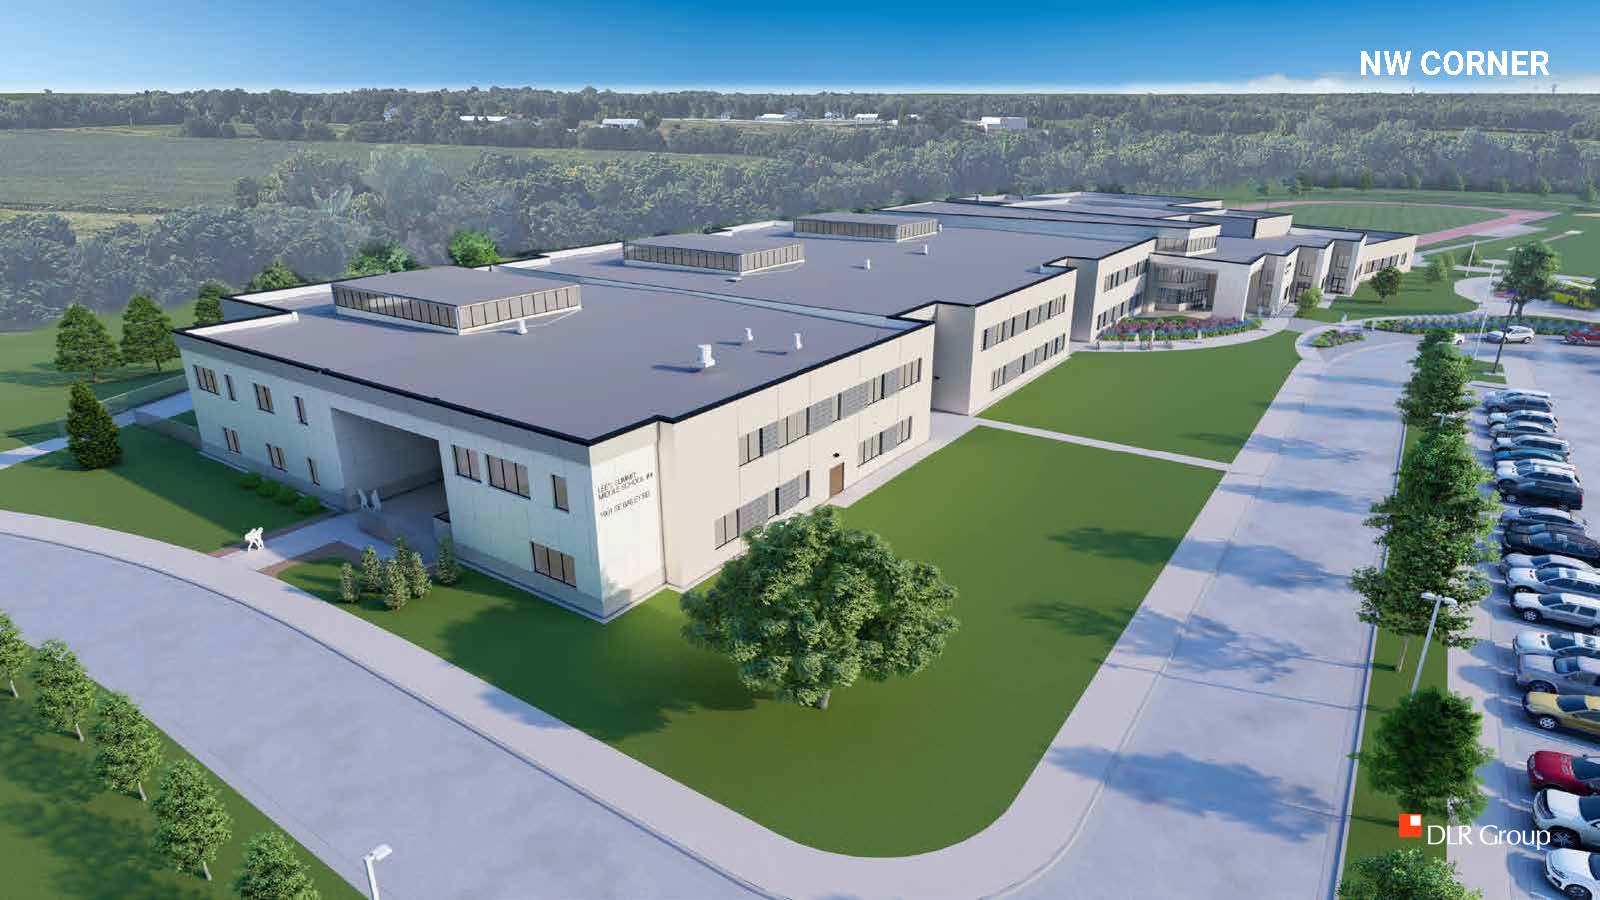 Rendering of Lee's Summit East Trails Middle School, a new building McCownGordon is constructing.